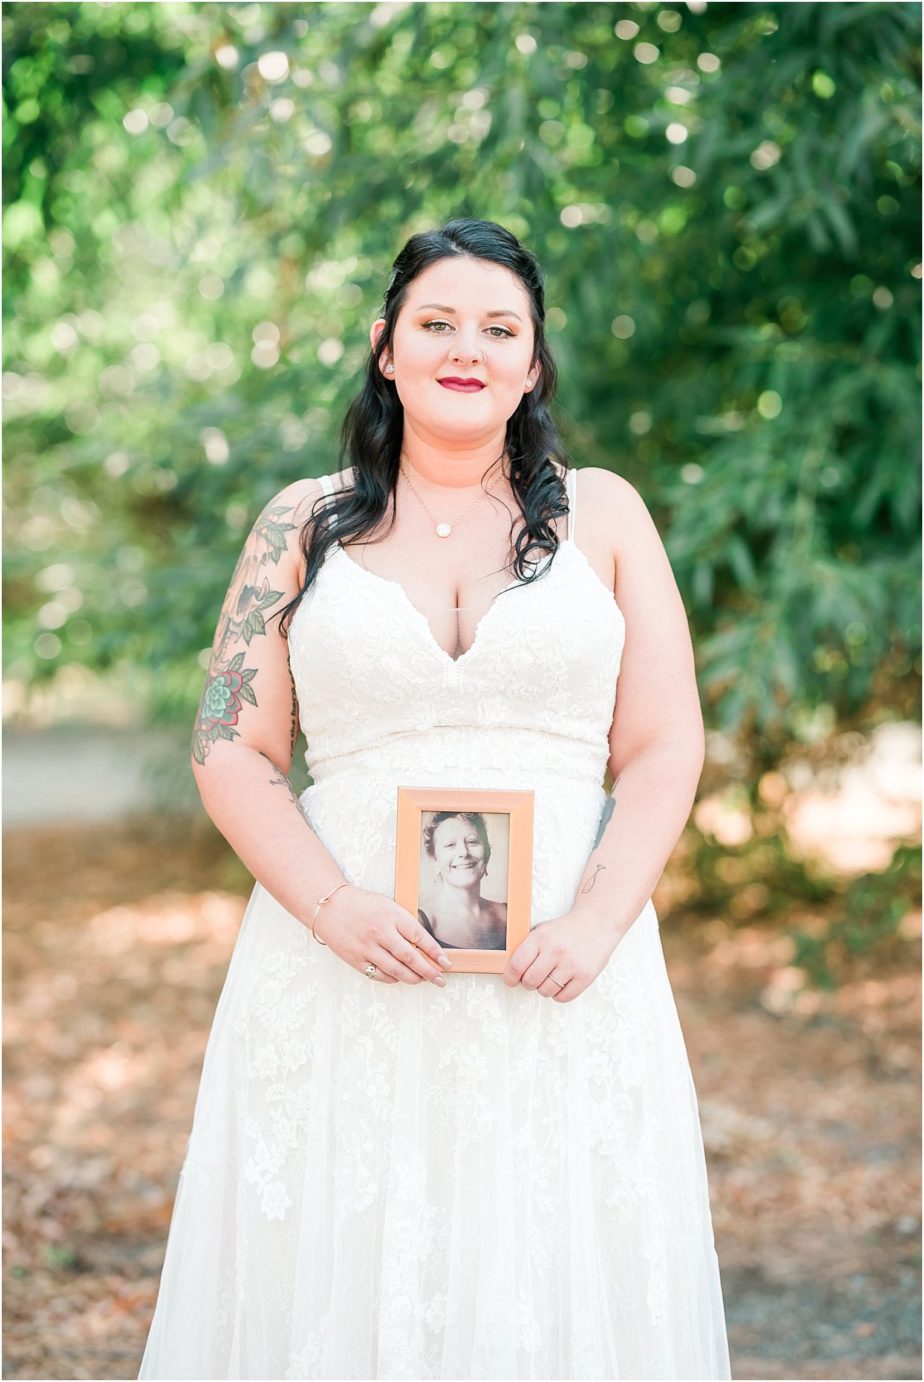 Favorite Wedding Moments of 2019 For Brides bride with late mother's photo